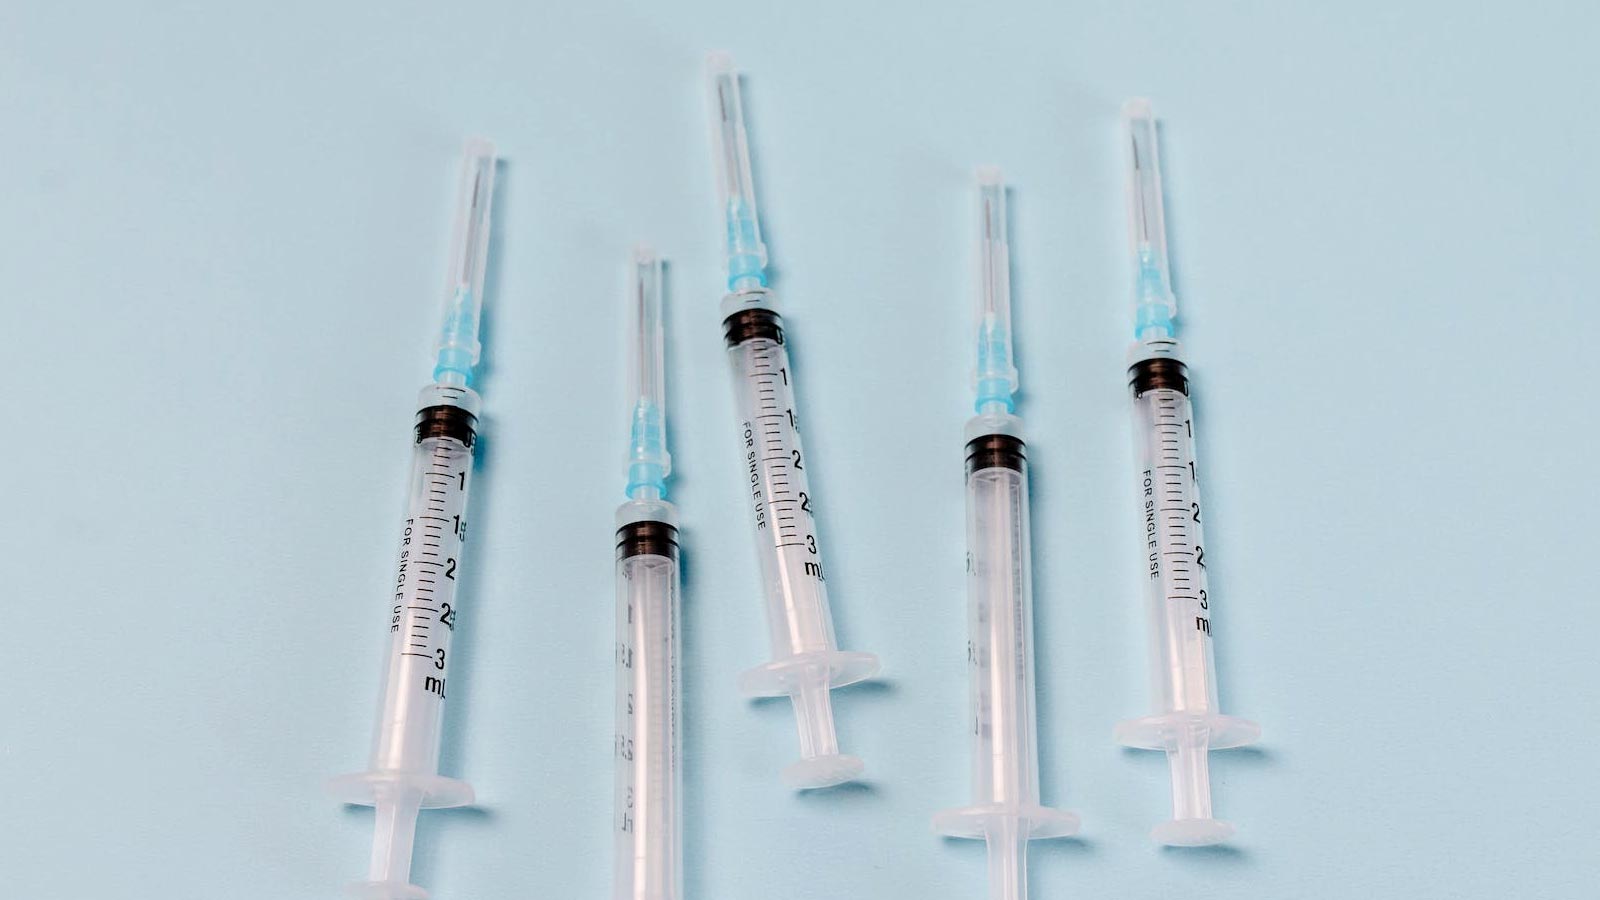 HRT needles and syringes